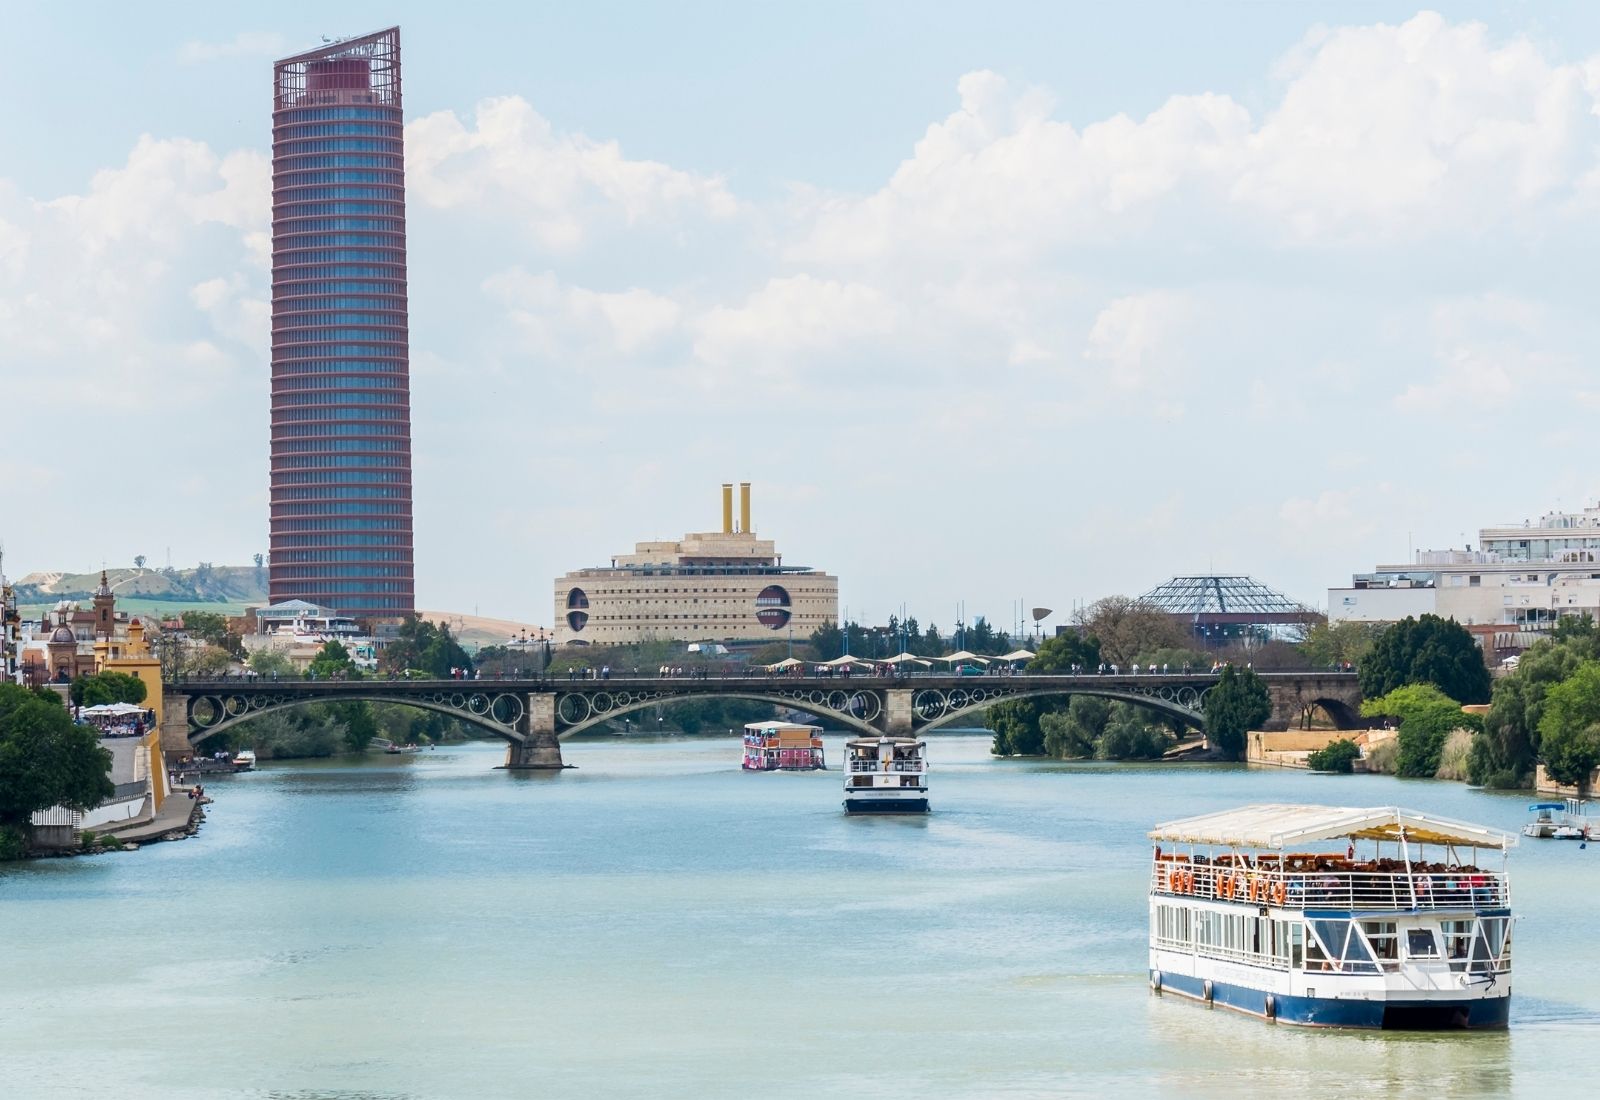 A photo of a boat on the Guadalquivir river, with the Sevilla Tower in the background.